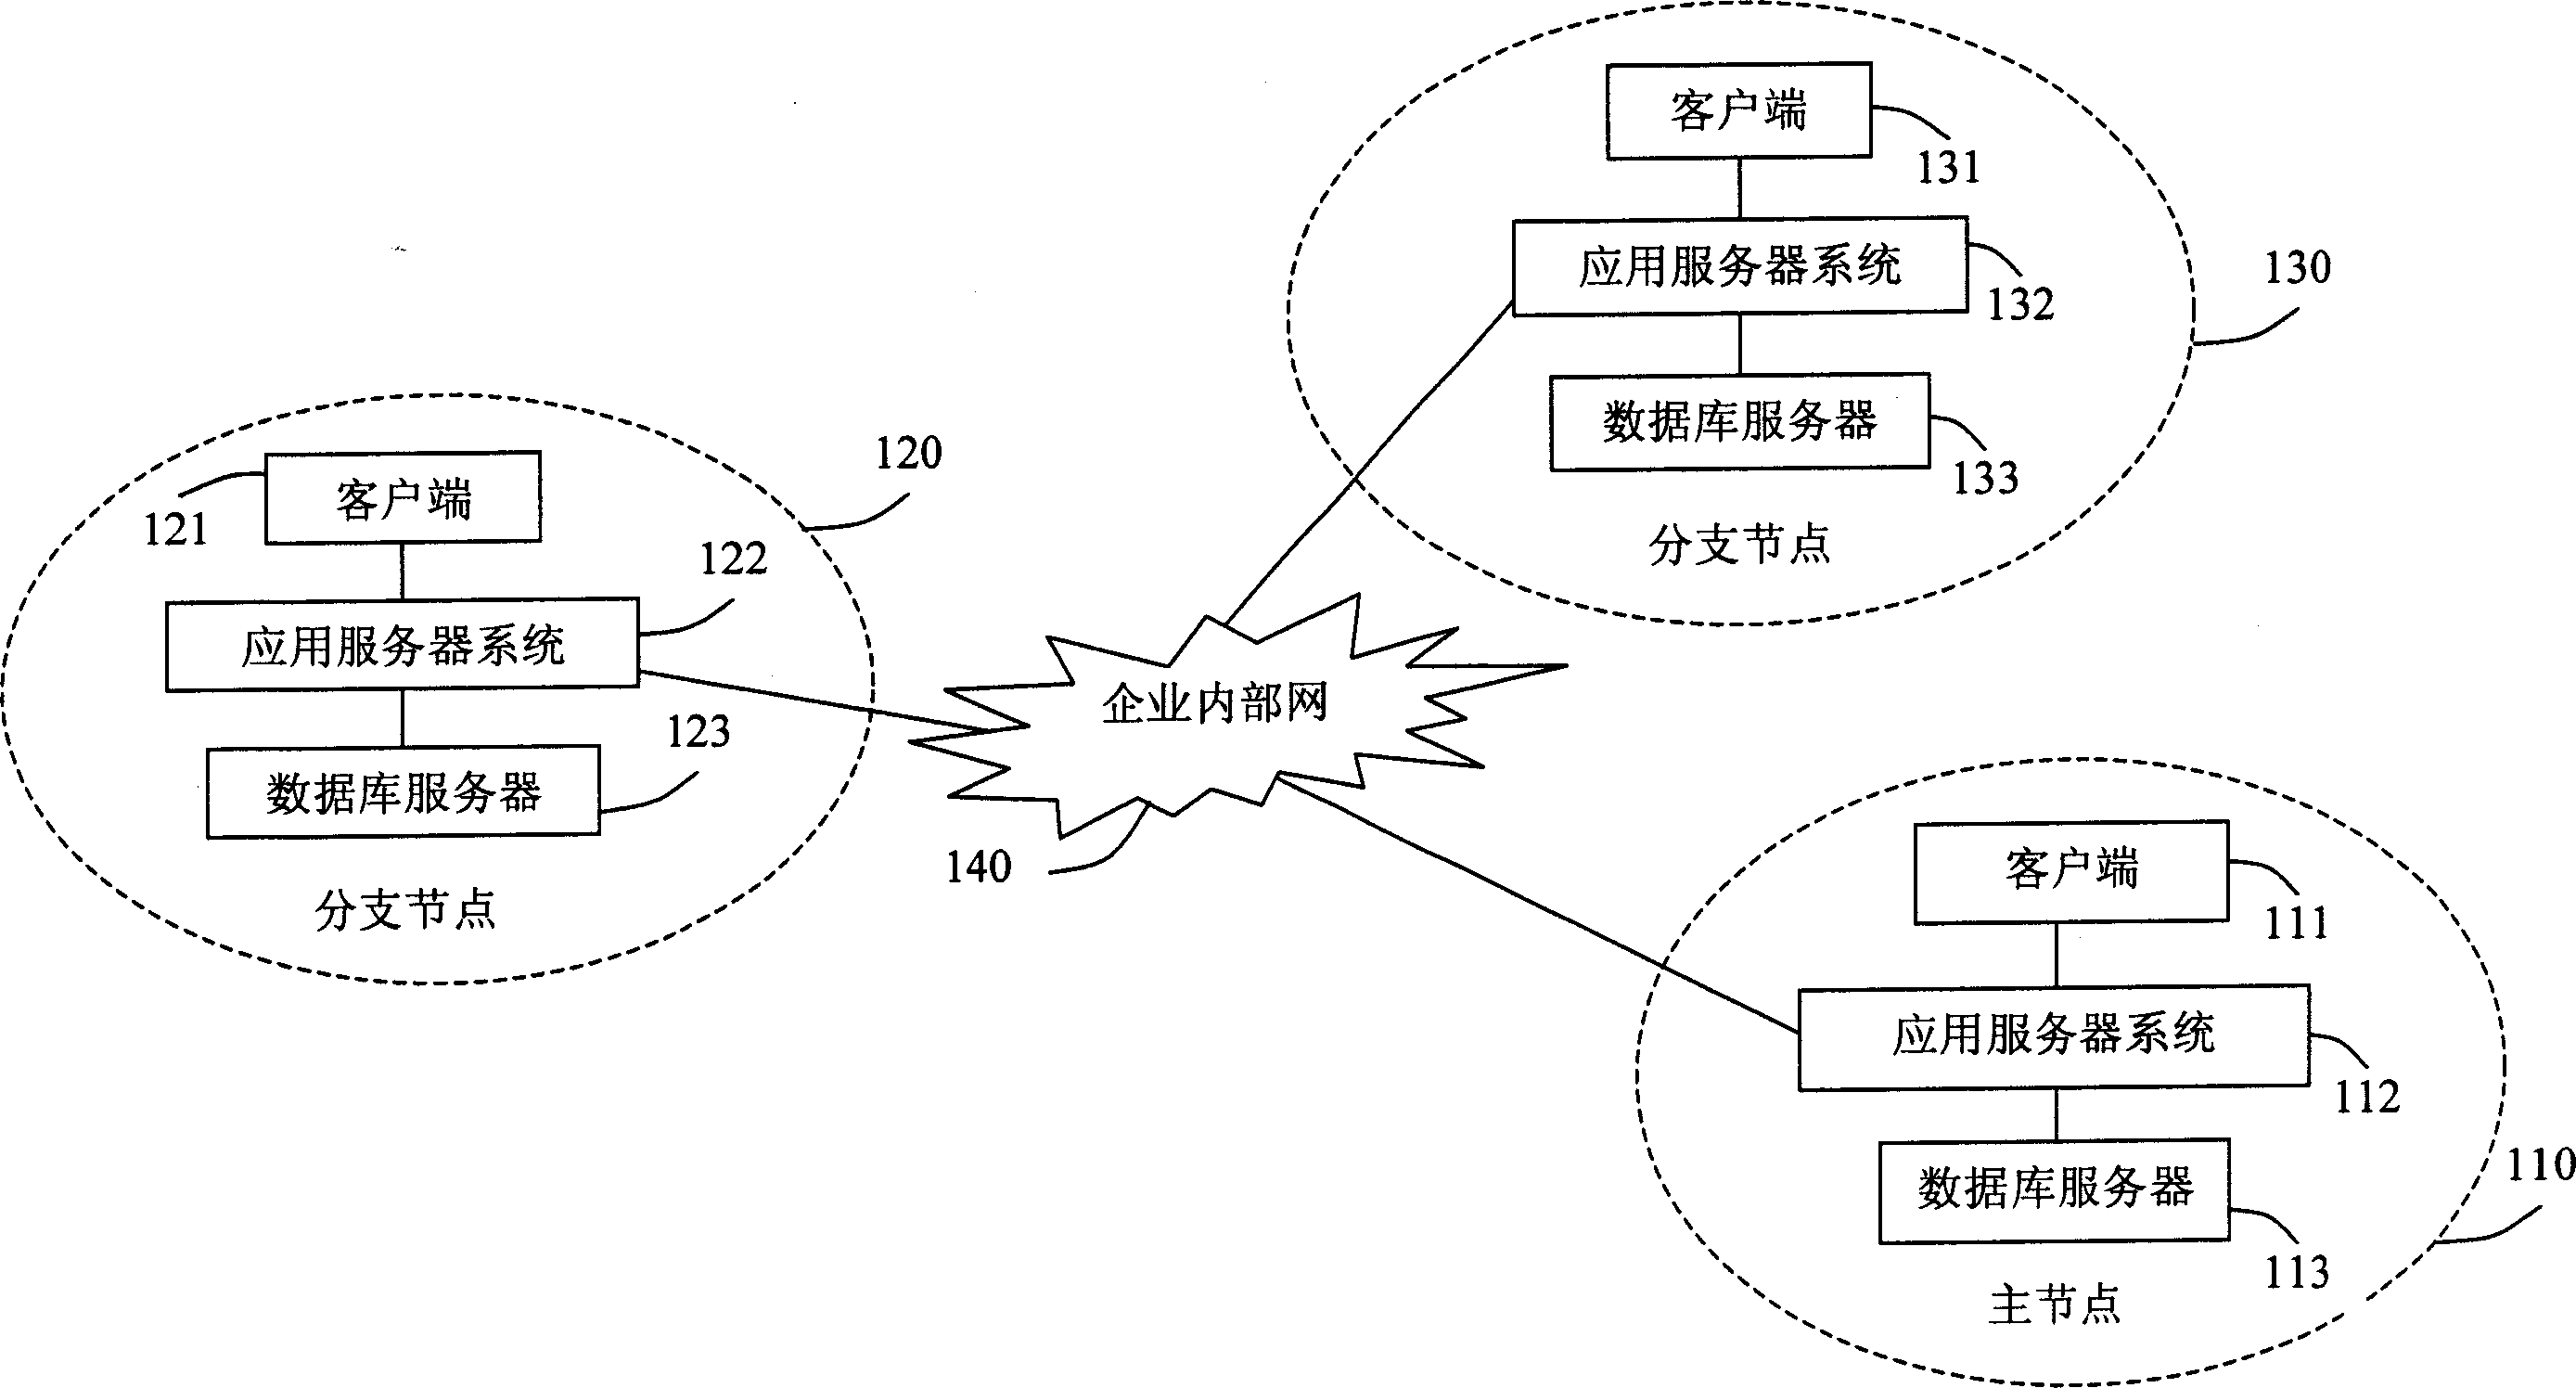 Non Structured data synchronous system and method